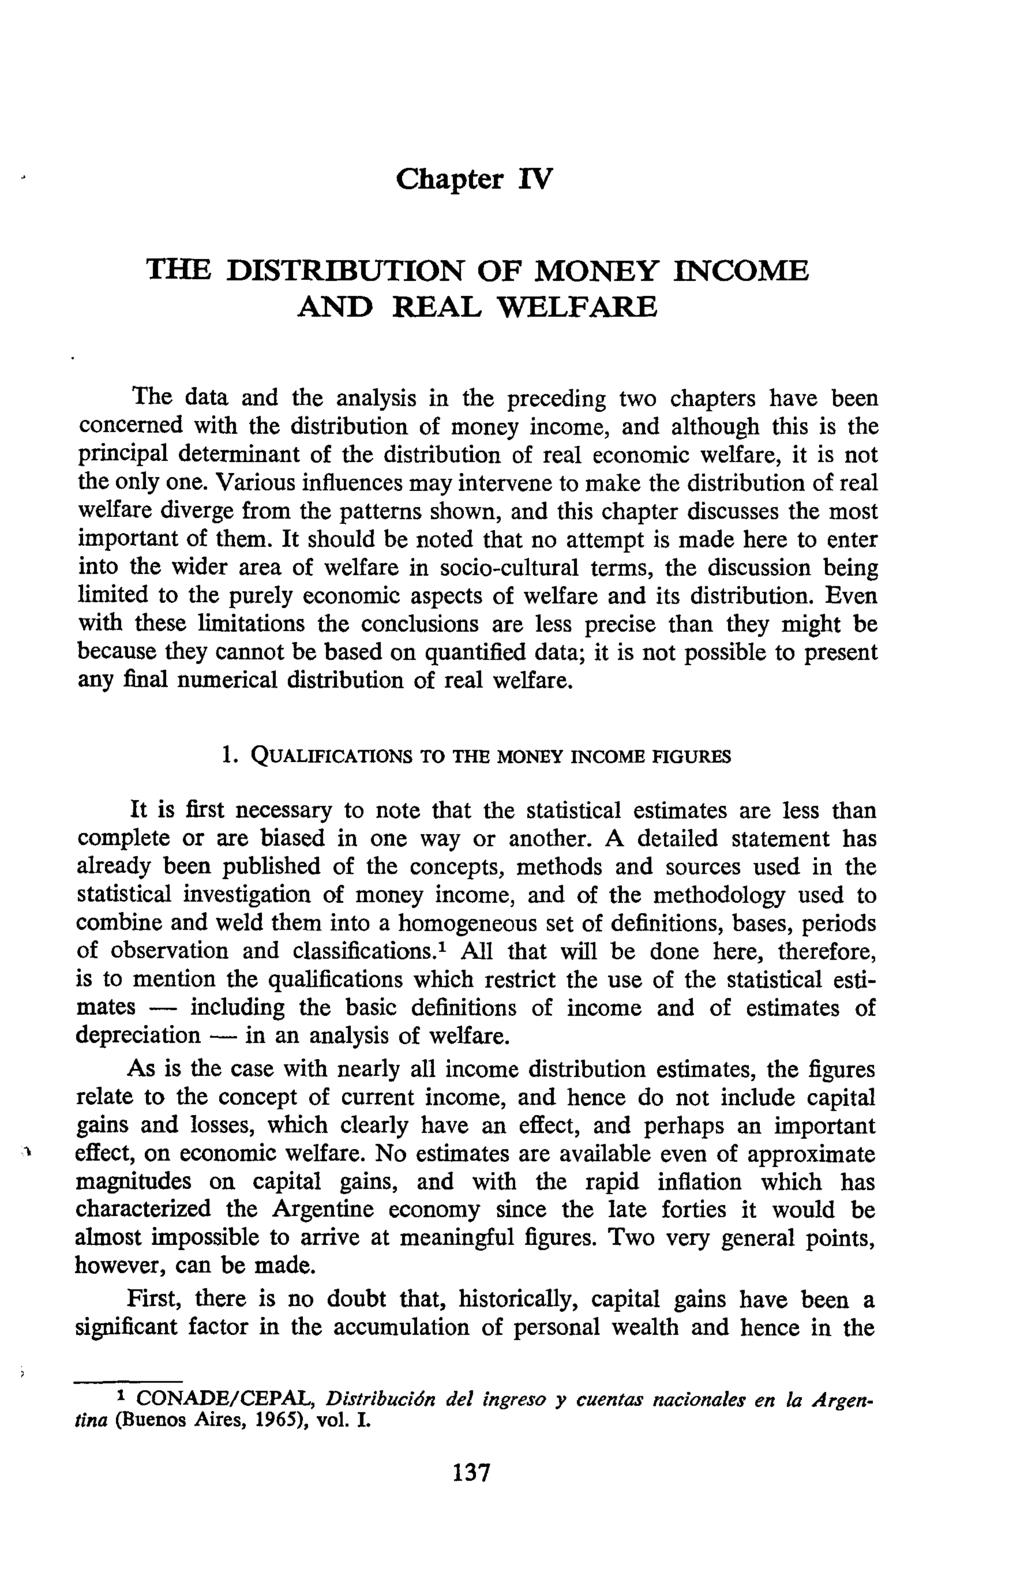 Chapter IV THE DISTRIBUTION OF MONEY INCOME AND REAL WELFARE The data and the analysis in the preceding two chapters have been concerned with the distribution of money income, and although this is